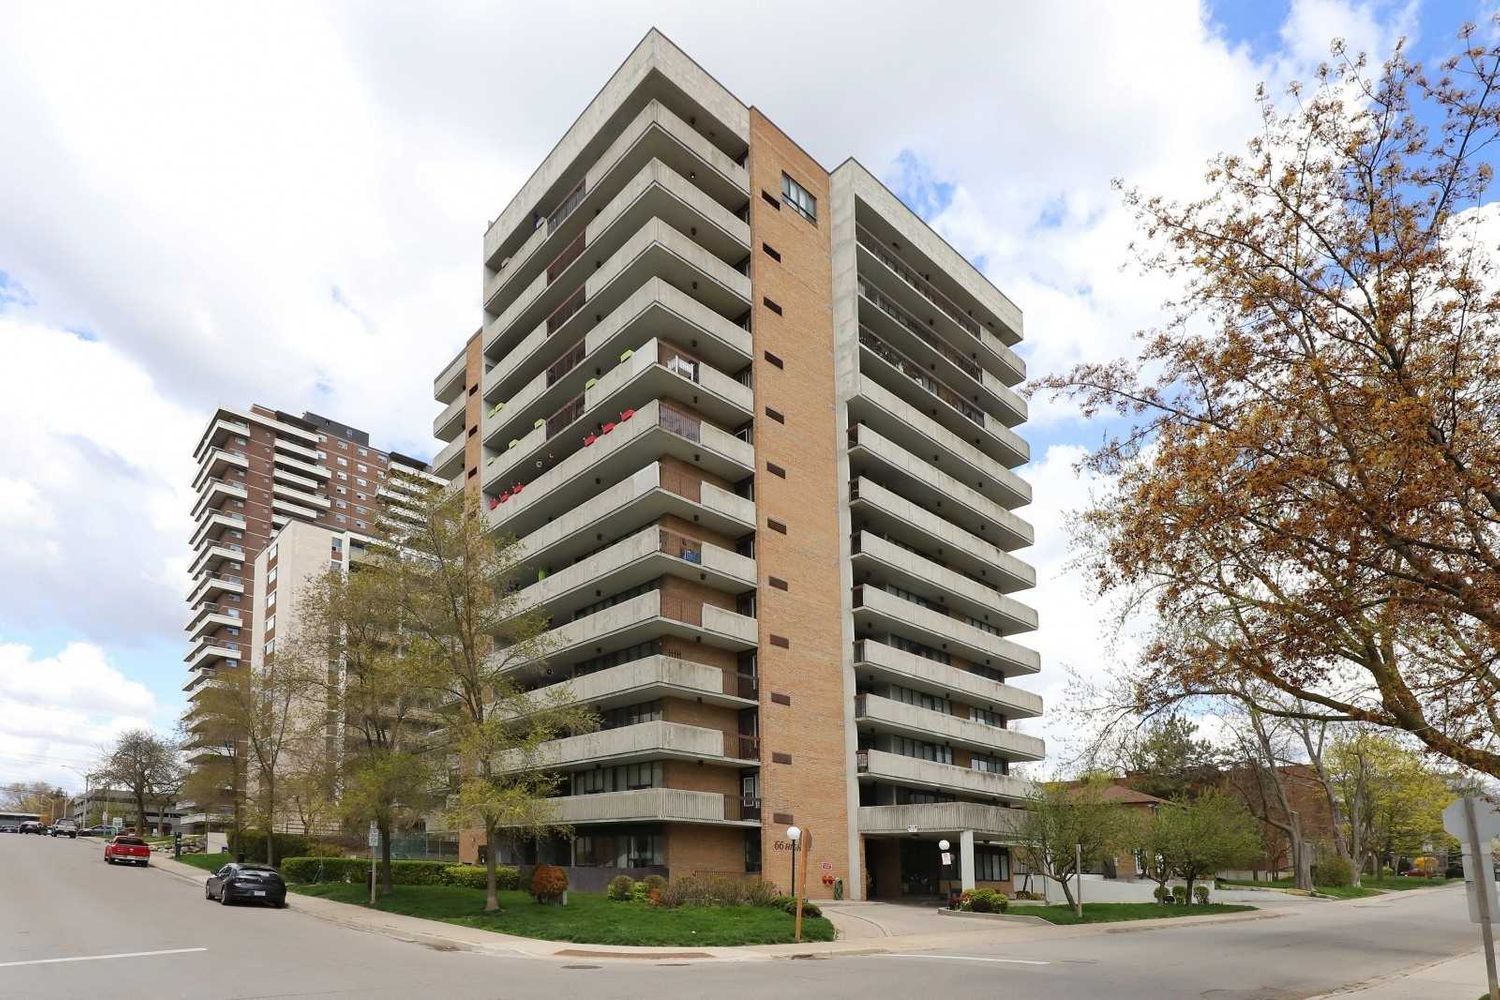 66 High Street E. The Royal Crest Condos is located in  Mississauga, Toronto - image #1 of 2